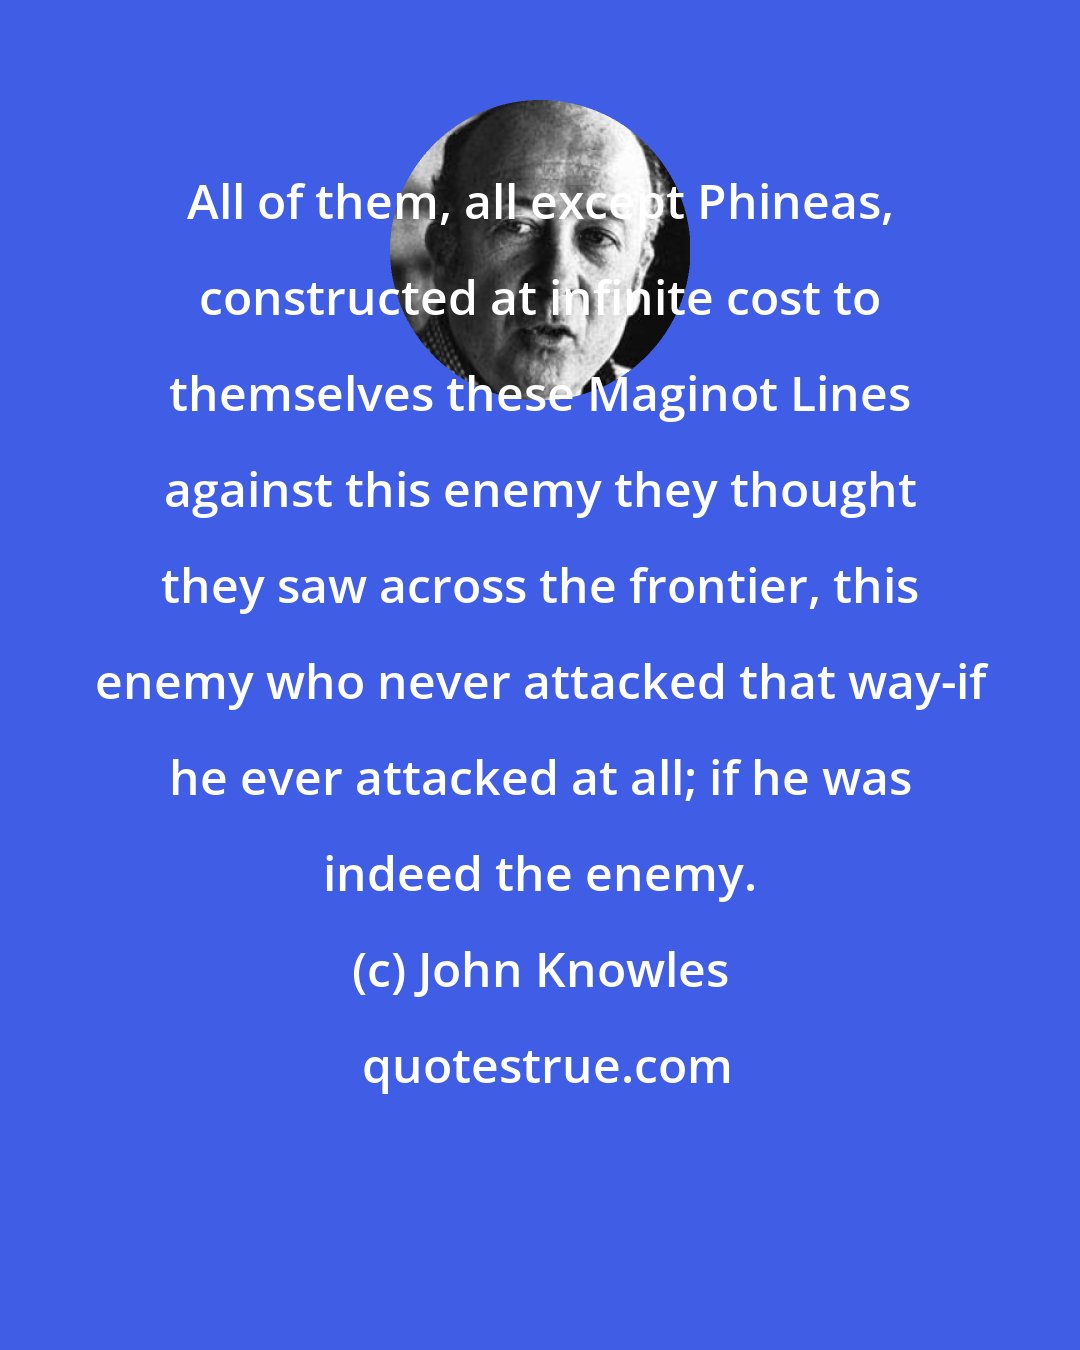 John Knowles: All of them, all except Phineas, constructed at infinite cost to themselves these Maginot Lines against this enemy they thought they saw across the frontier, this enemy who never attacked that way-if he ever attacked at all; if he was indeed the enemy.